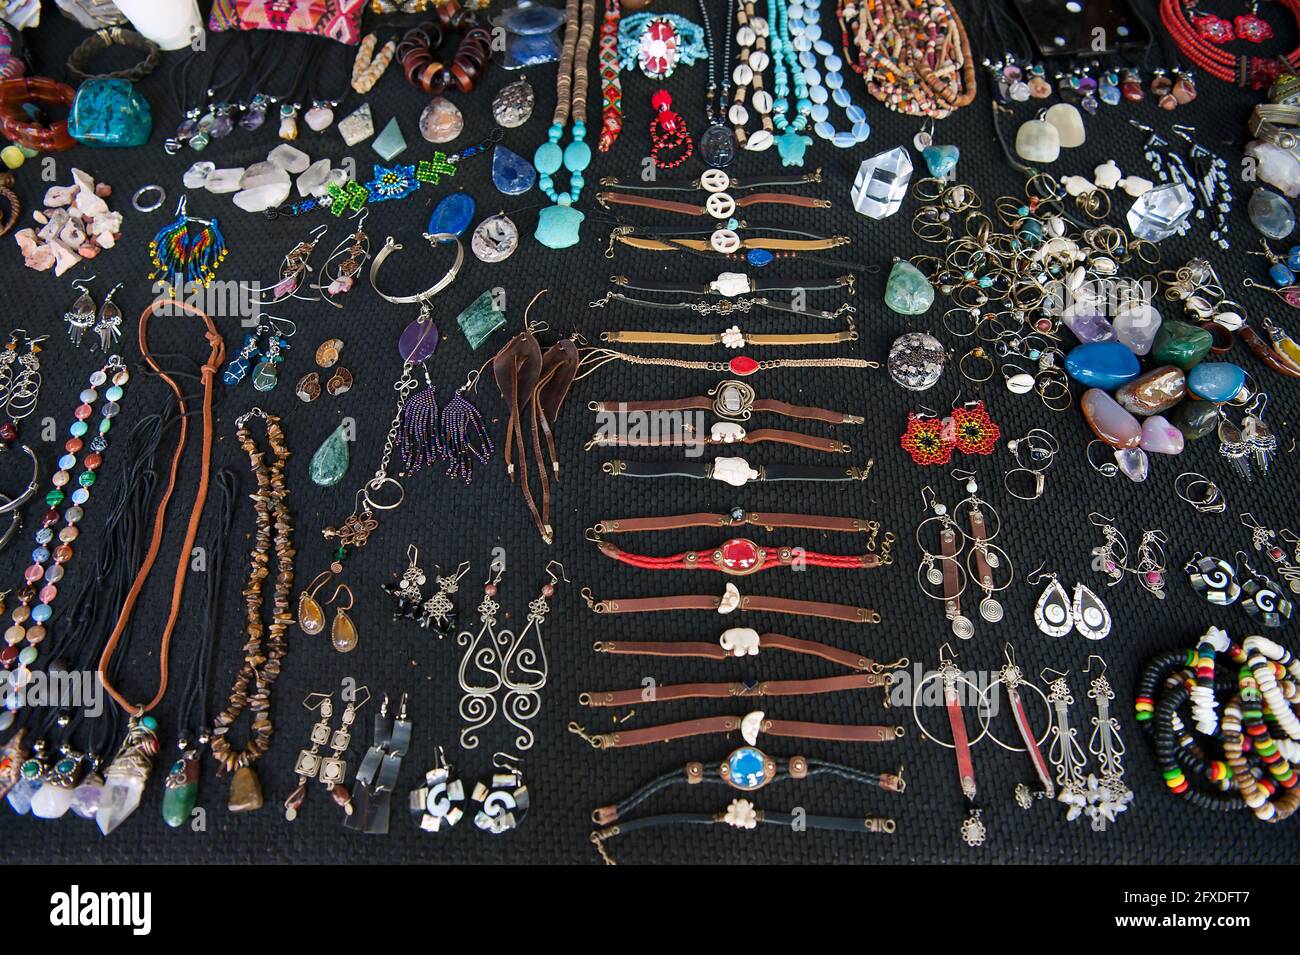 Colorful hand crafted jewelry for sale in market in Tamarindo, Costa Rica Stock Photo